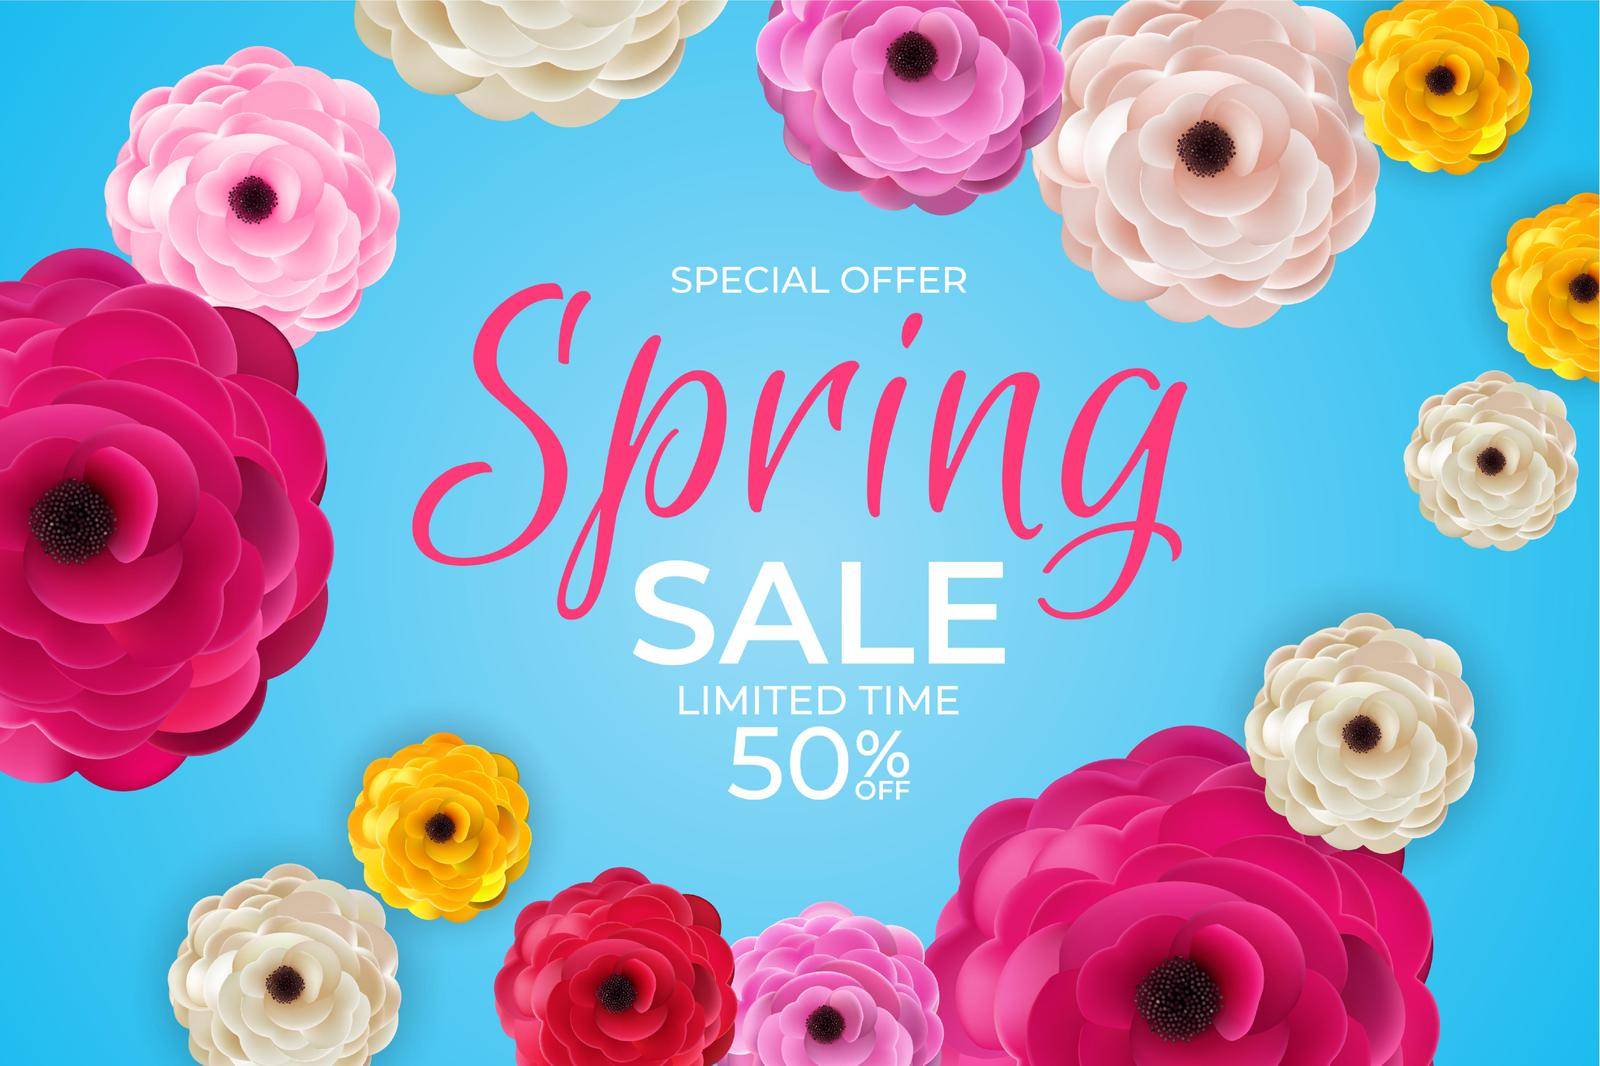 Spring Special Offer Sale Background Poster Natural Flowers and Leaves Template. Vector Illustration